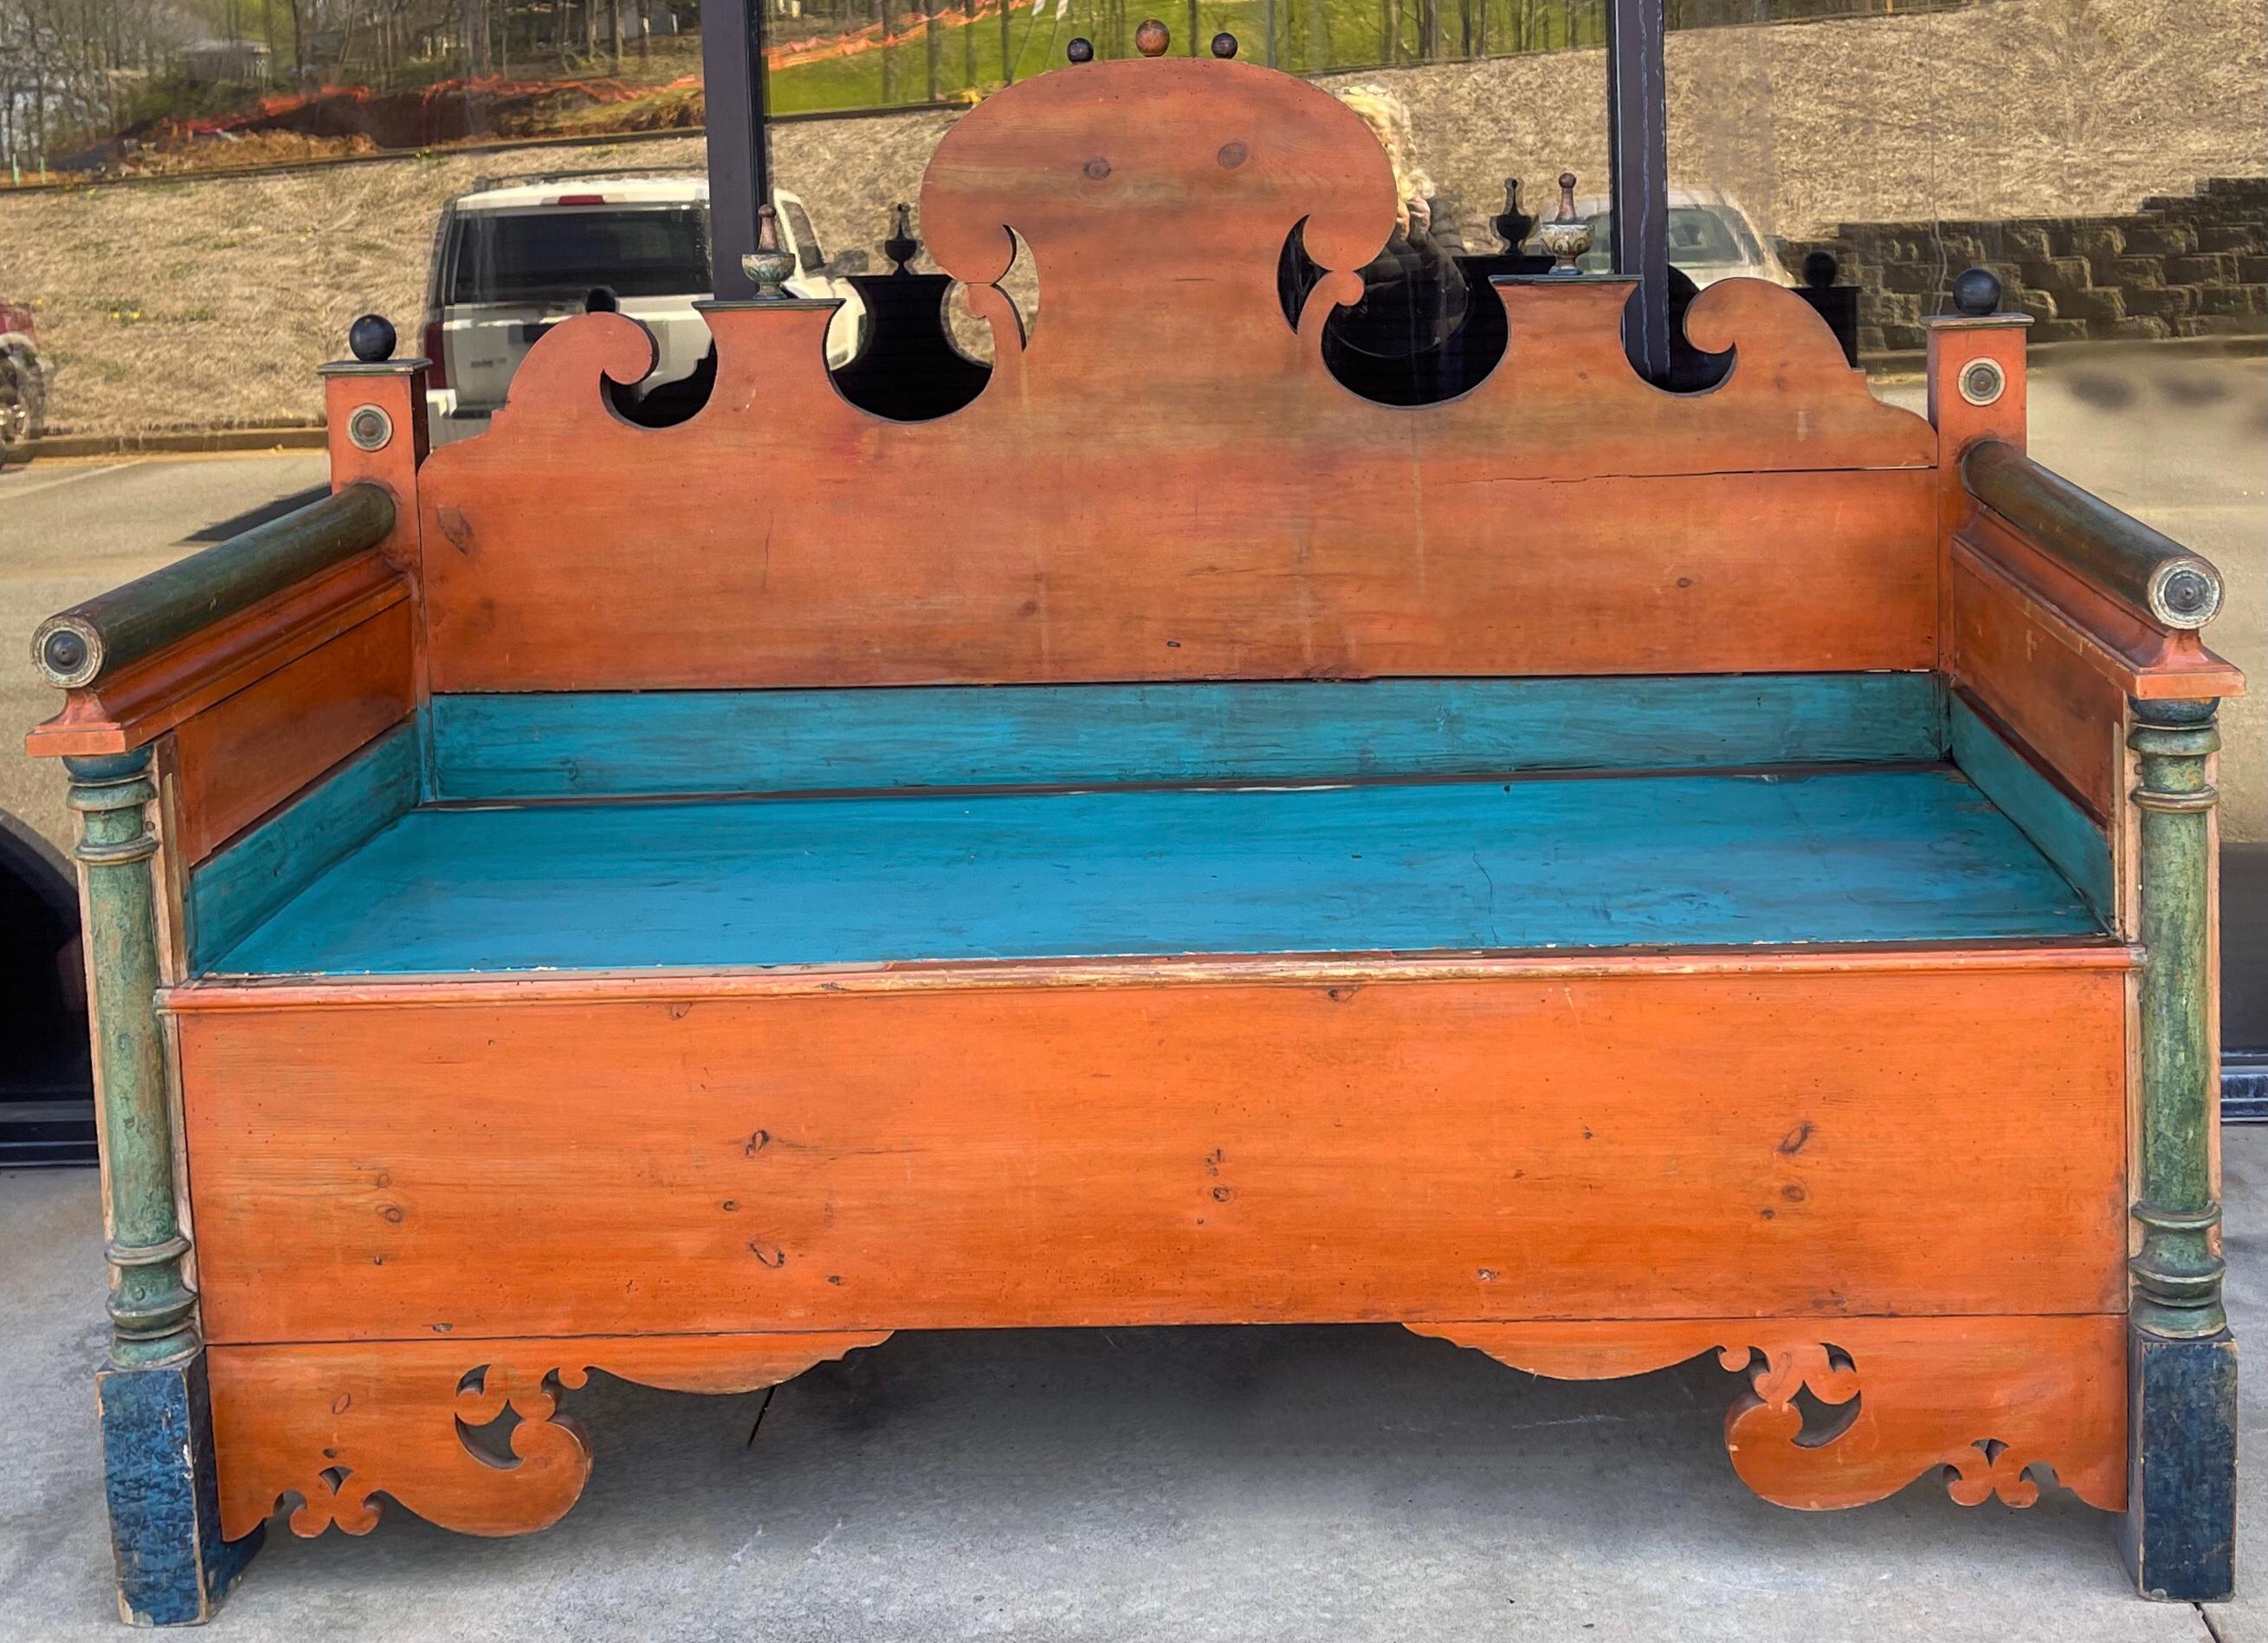 This is an early hand painted Swedish bench with seat storage. It is perfect for that large hall or garage entrance or even porch. The seat board lifts out and it is knotty pine. It definitely has been modified over the years with seating